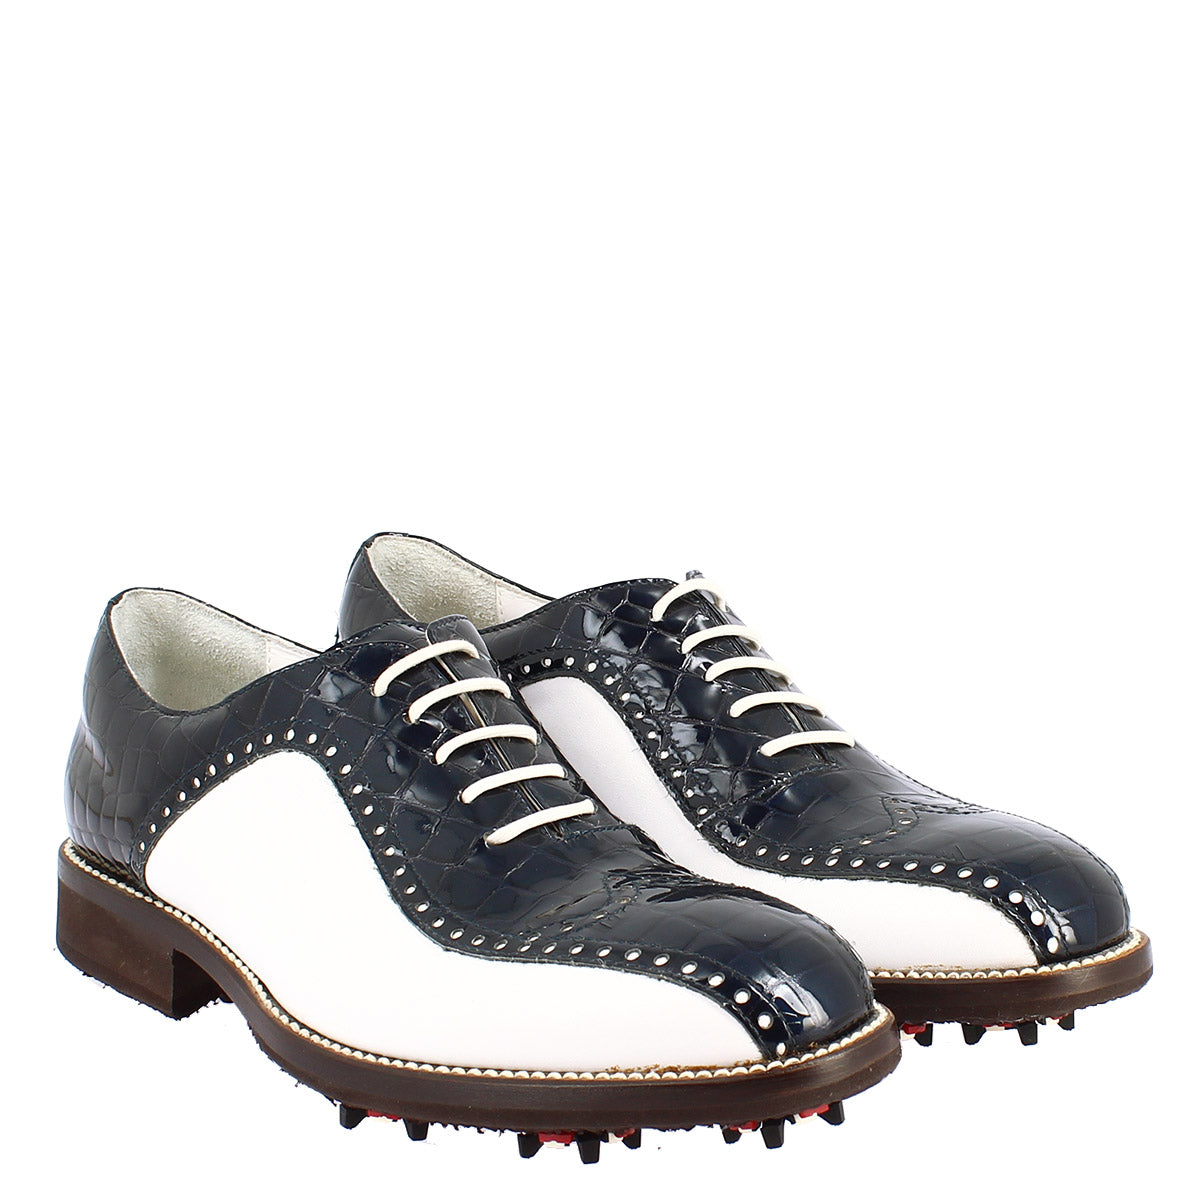 Handcrafted men's golf shoes in white full-grain leather coconut blue